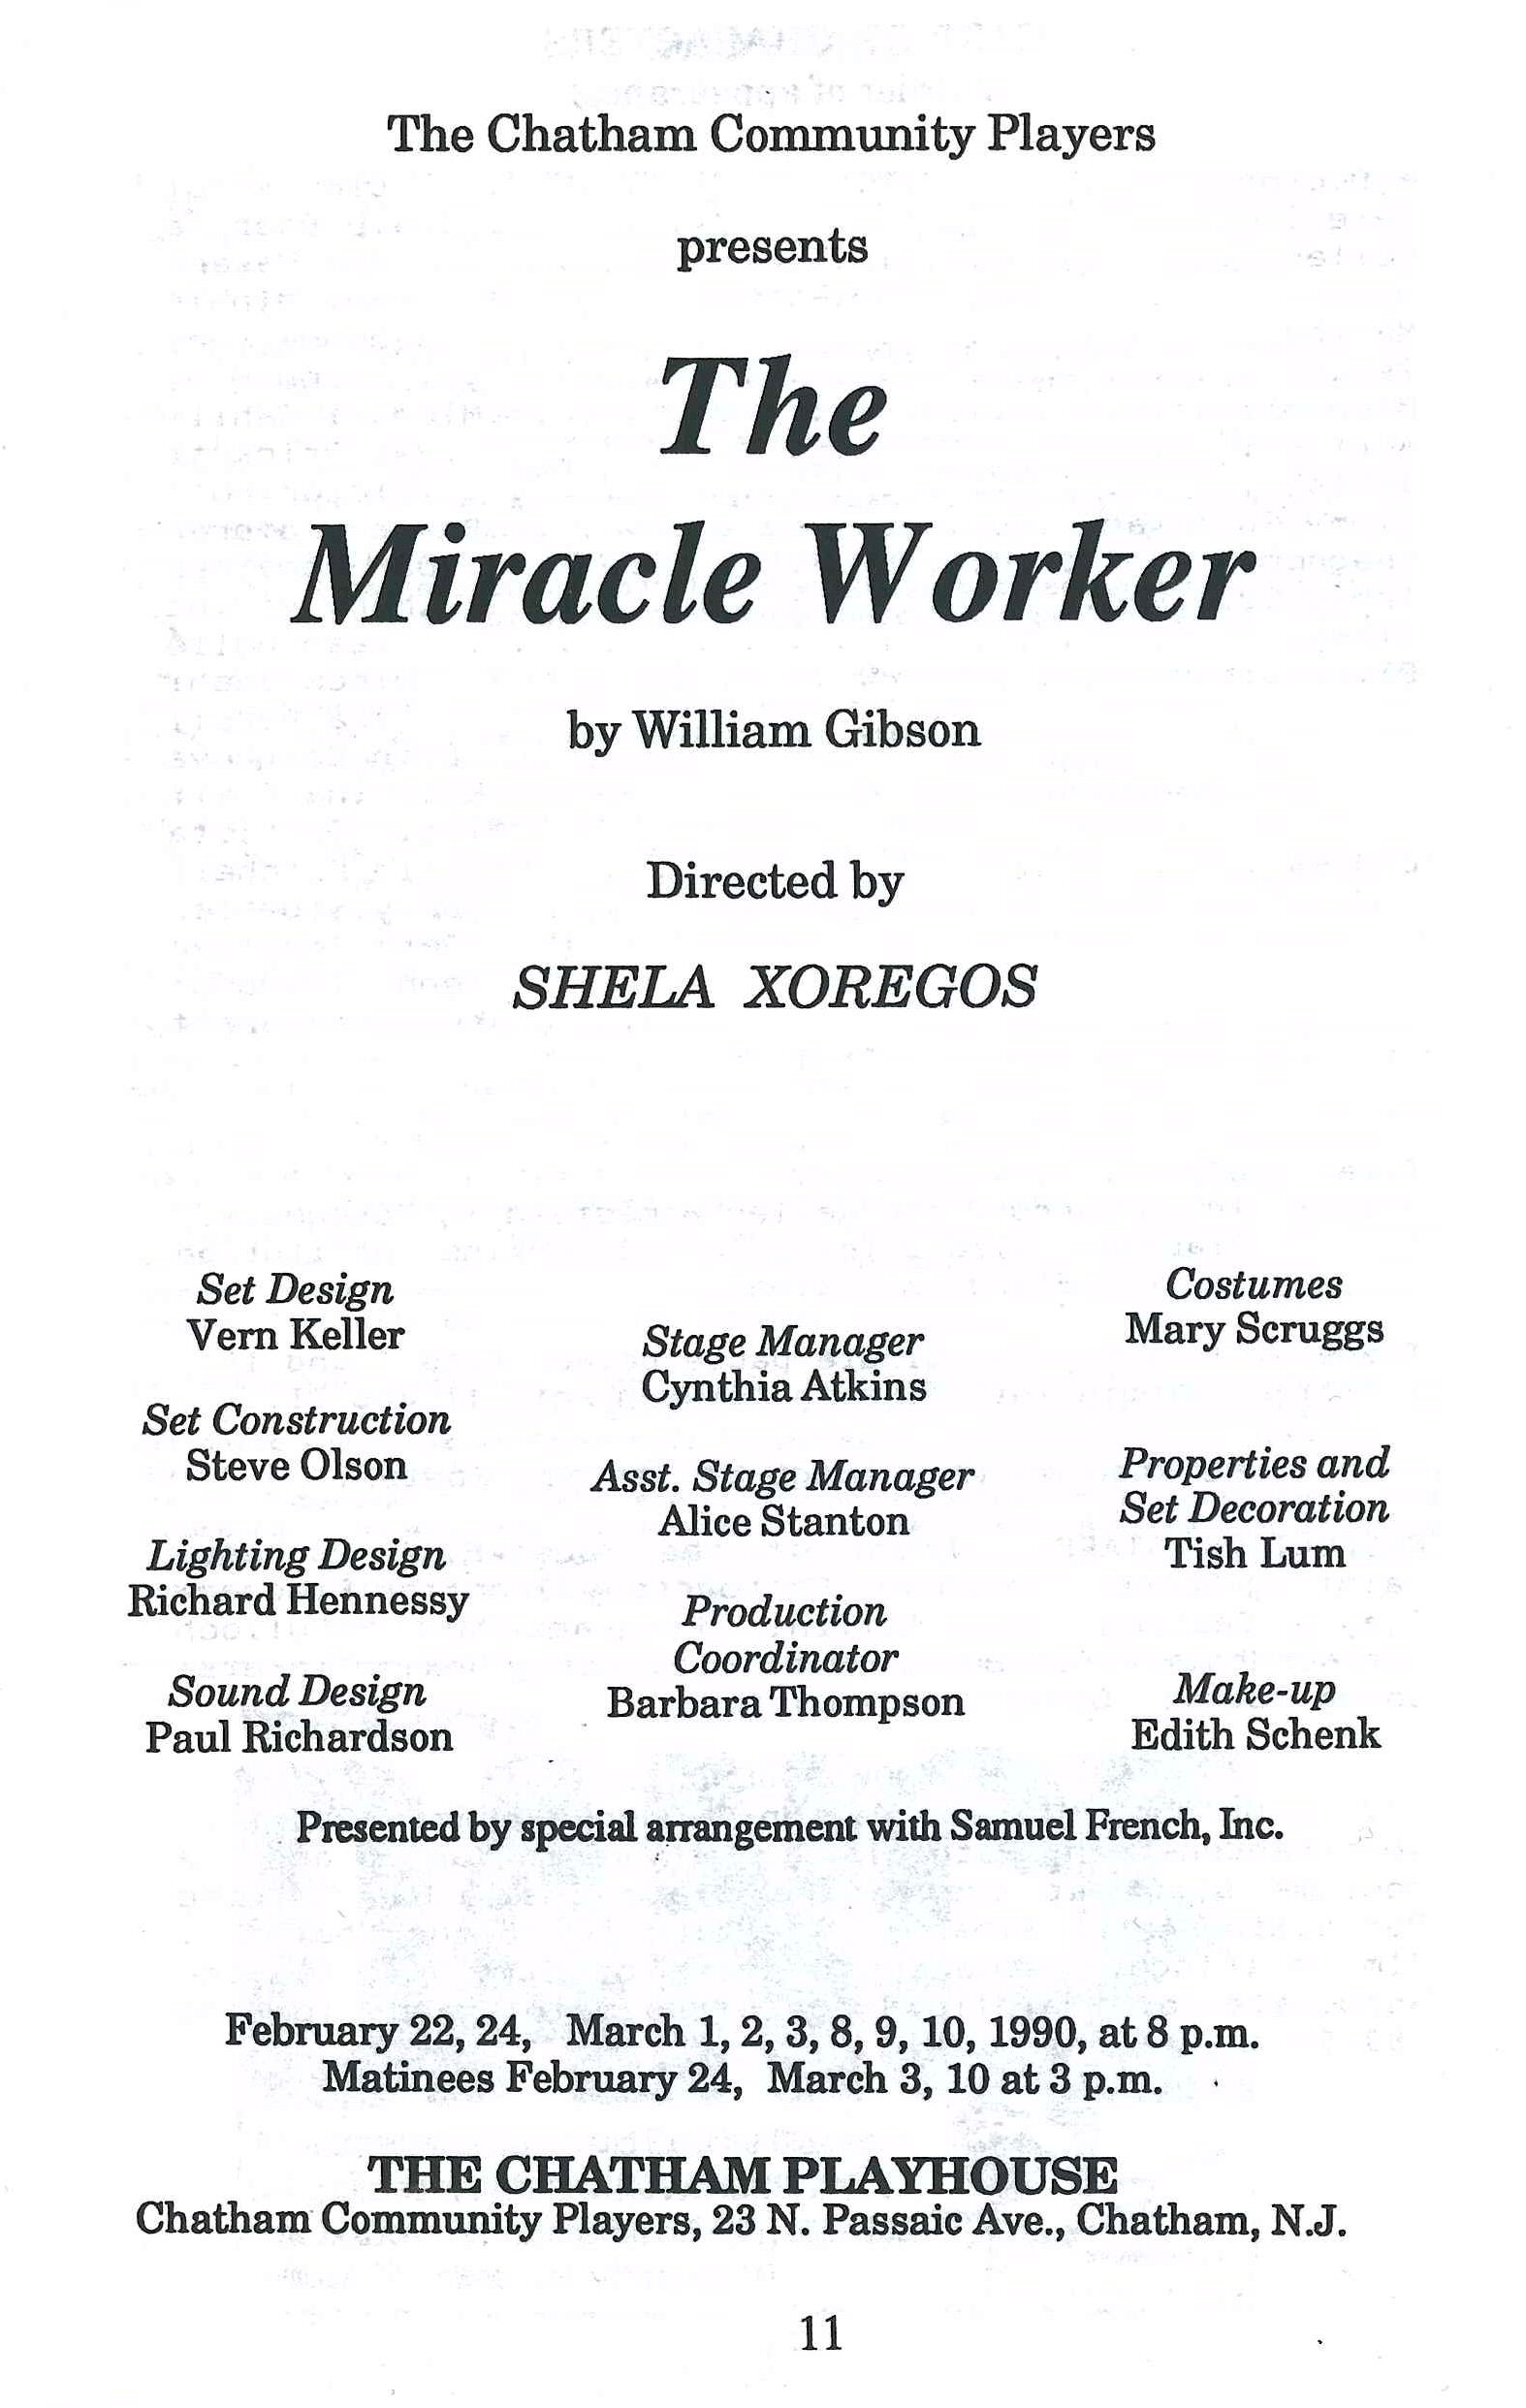 The Miracle Worker (1989)